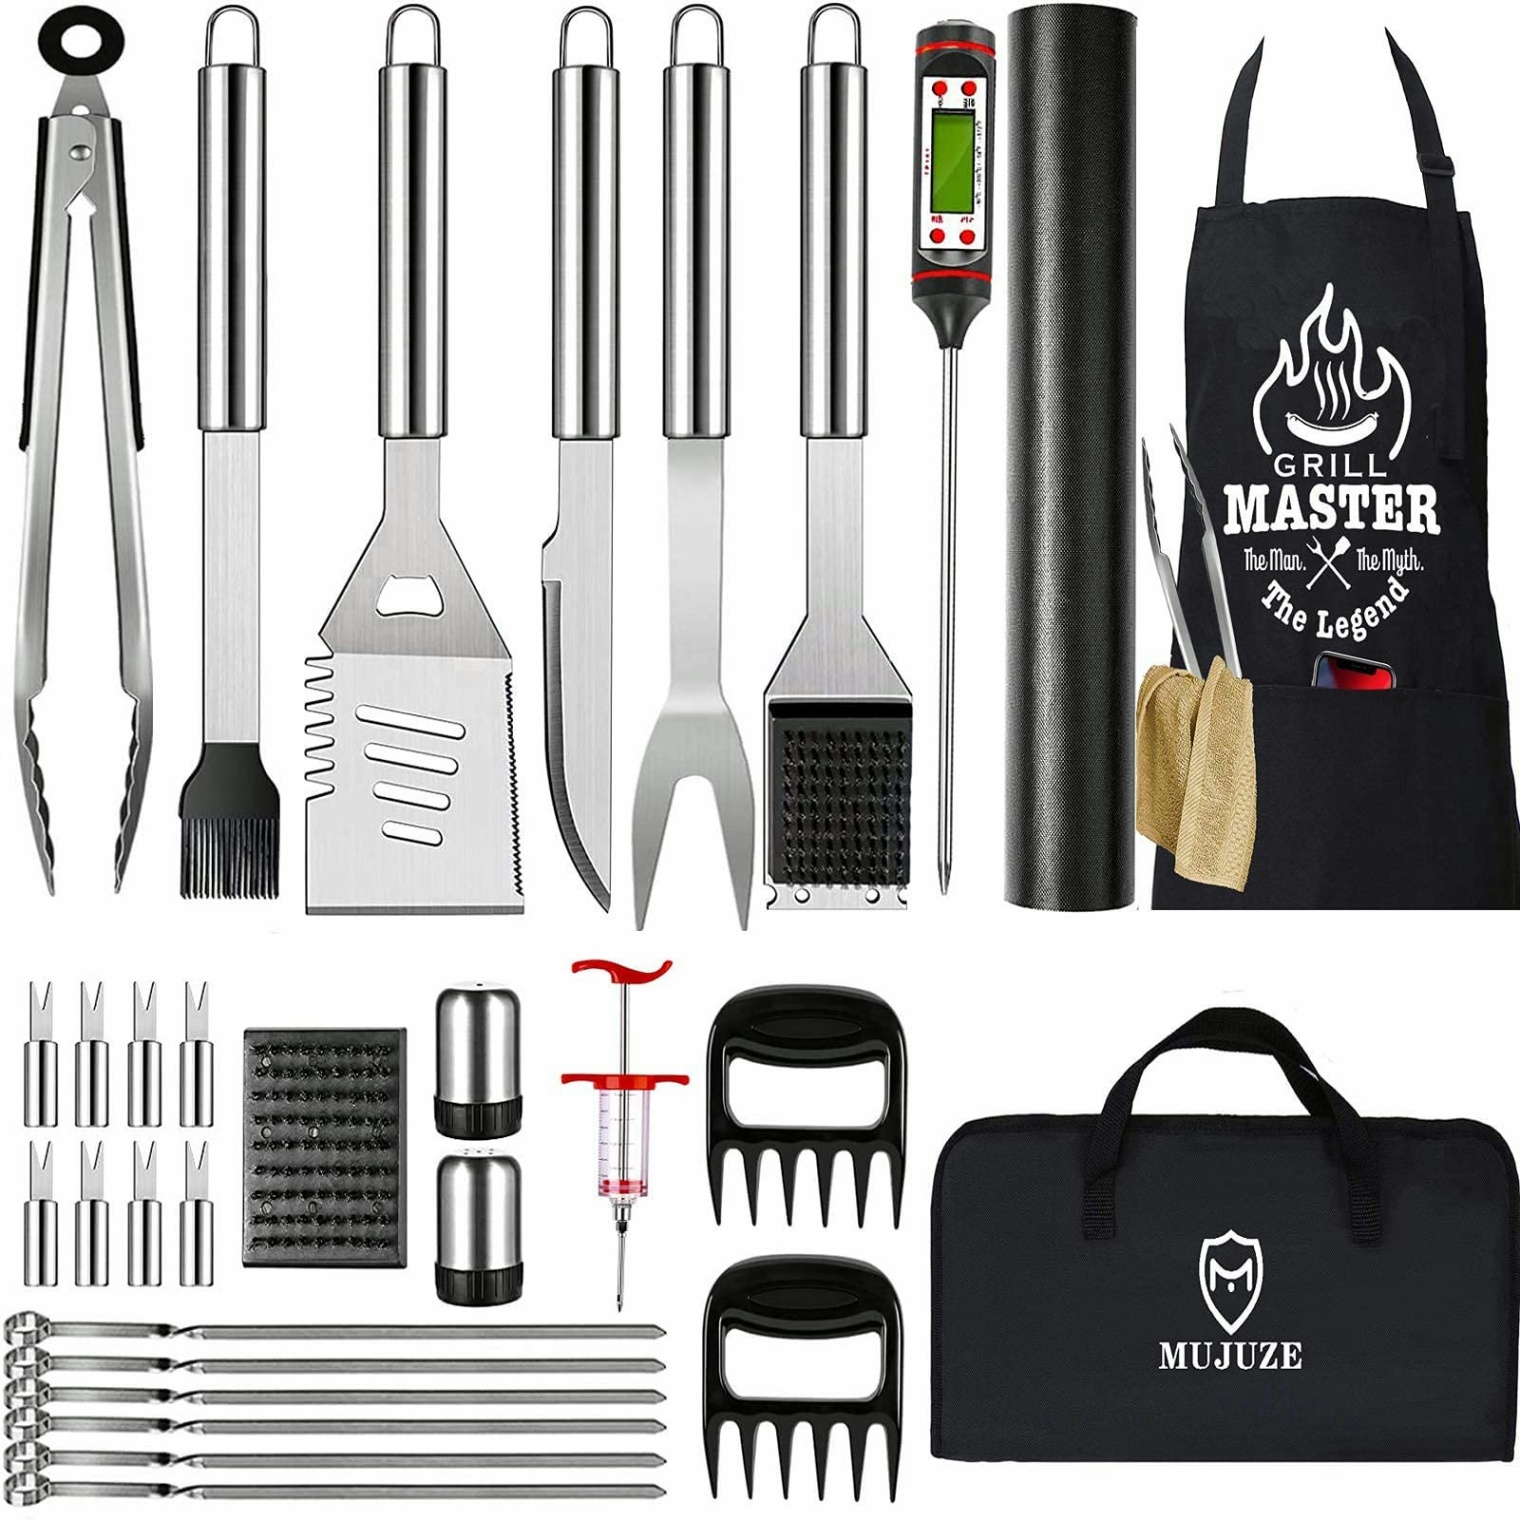 bbq accessories near me Niche Utama Home Grill Utensils Set,BBQ Grilling Accessories, Grill Set Gifts for Men Grill  Tools, MUJUZE Barbeque with Apron, Stainless Steel Grill Kit Set Gifts for